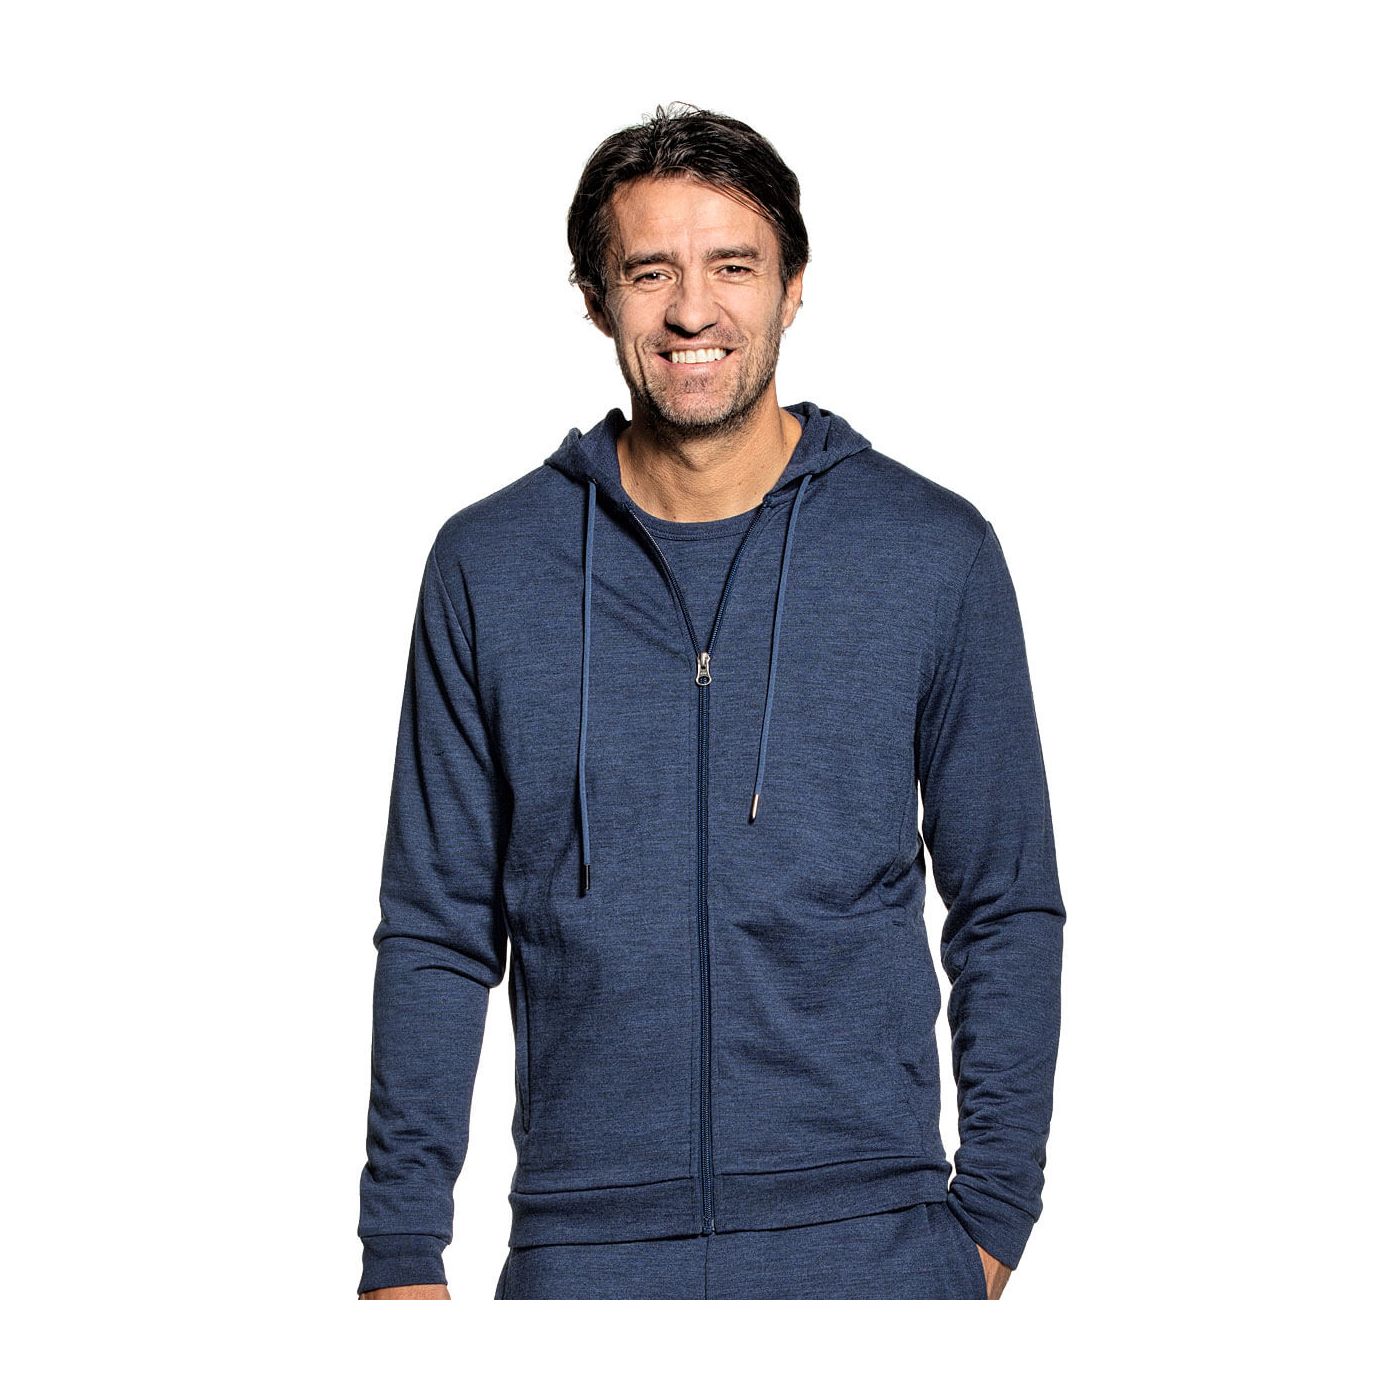 Hoodie with zipper for men made of Merino wool in Blue